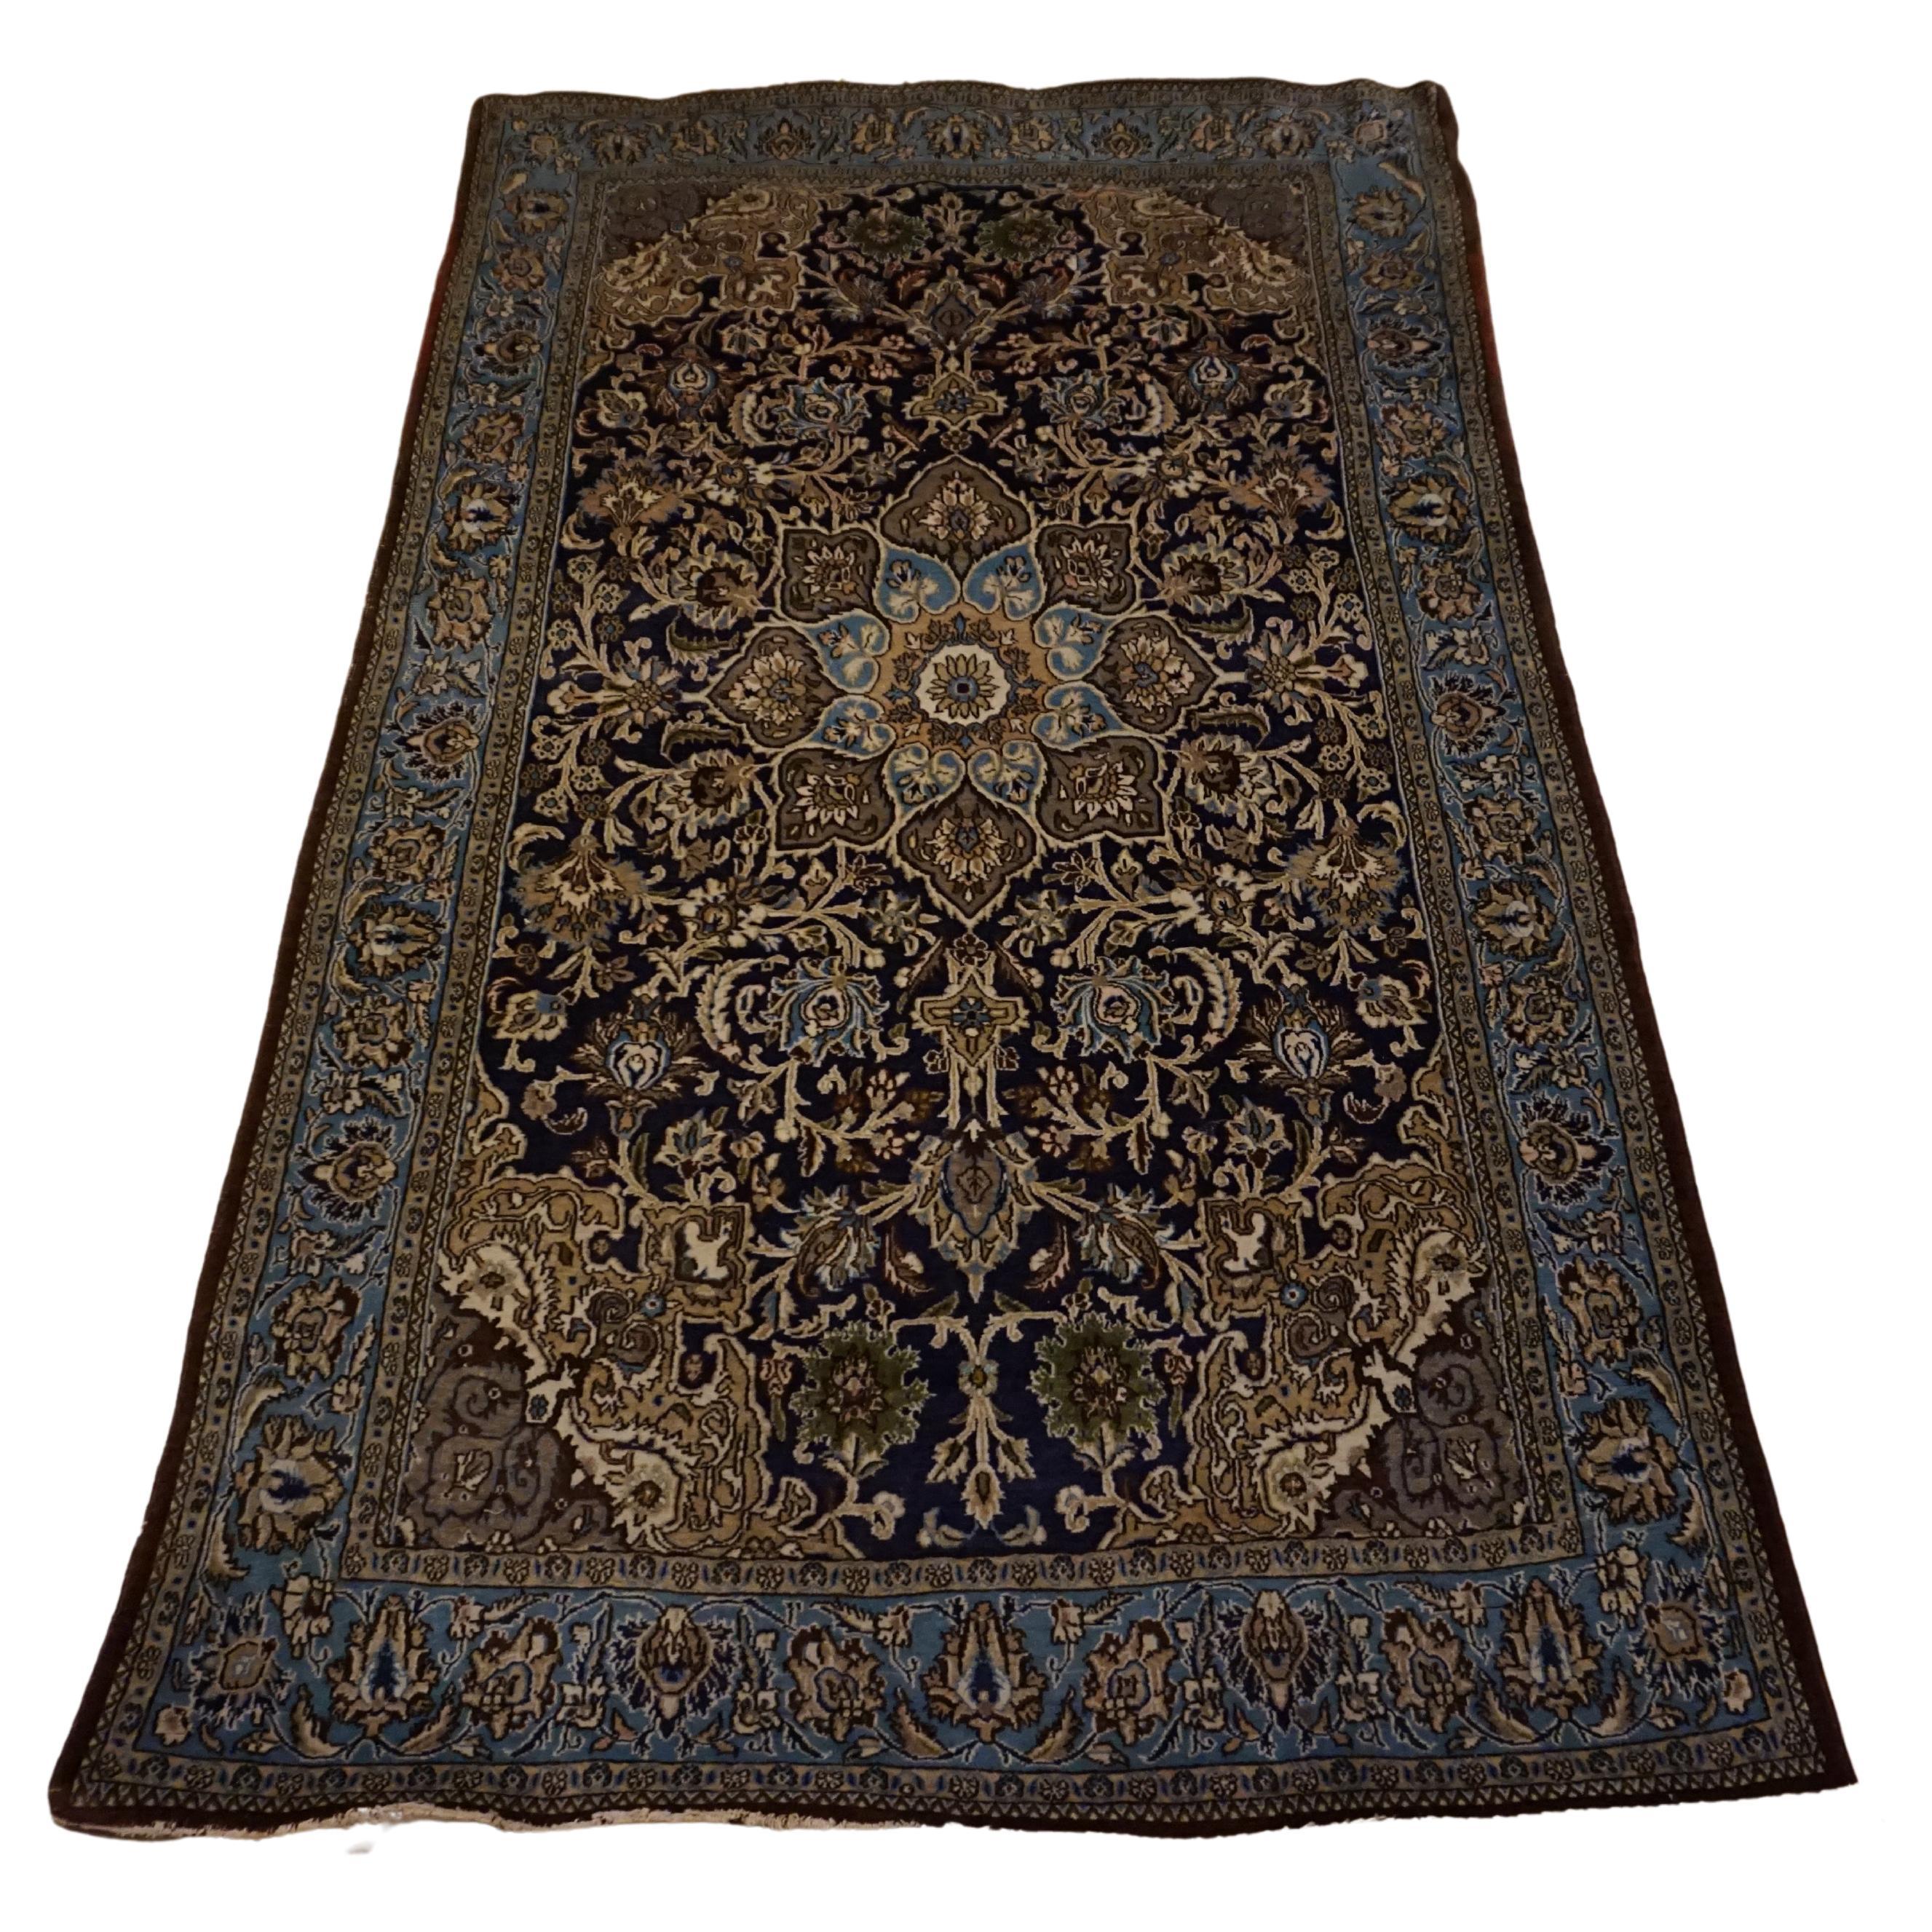 Antique Kashmir Kashan Rug Hand-knotted In Pure Wool In Indigo, Blues & Browns For Sale